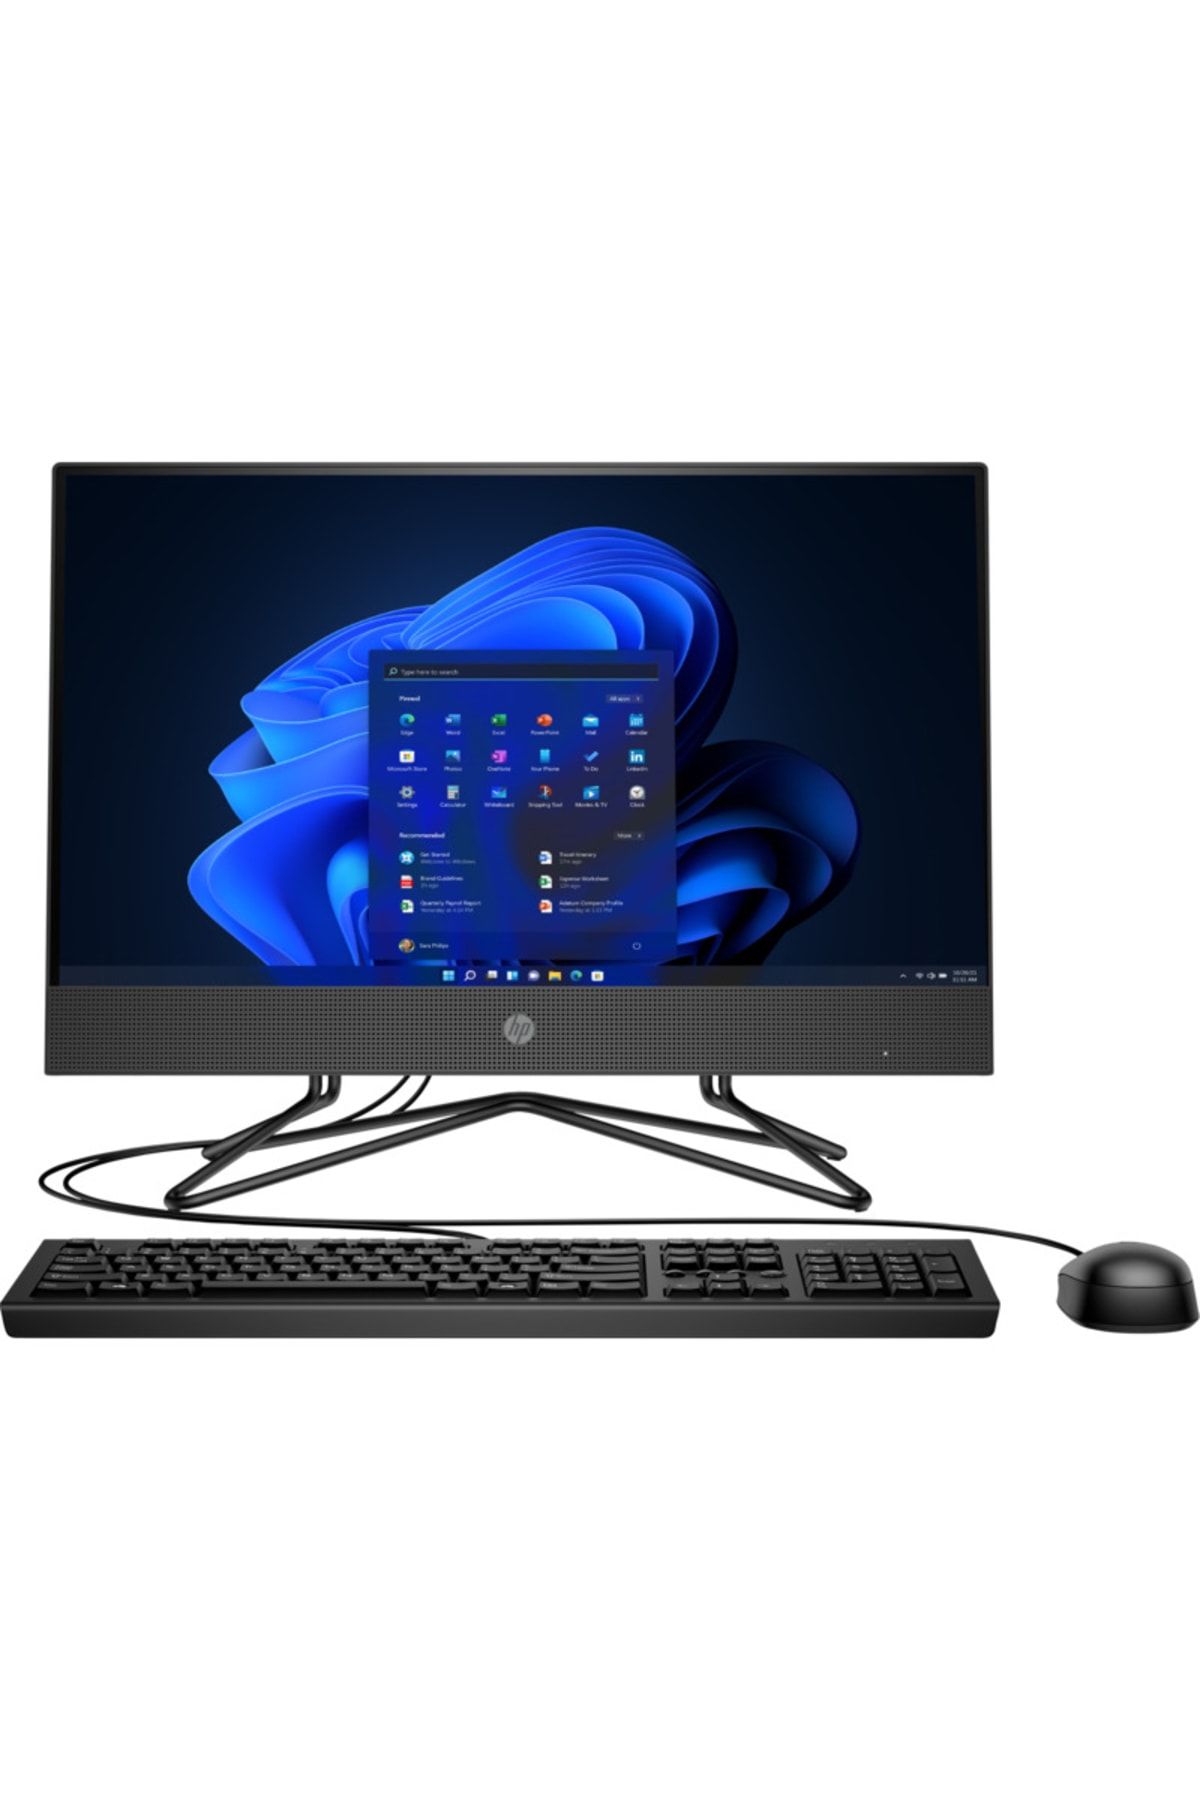 HP 200 G4 I3-10110u 8 Gb 256 Gb M.2 W10 Pro 295d4ea01 Uhd Graphics 21.5'' Fhd All In One Pc